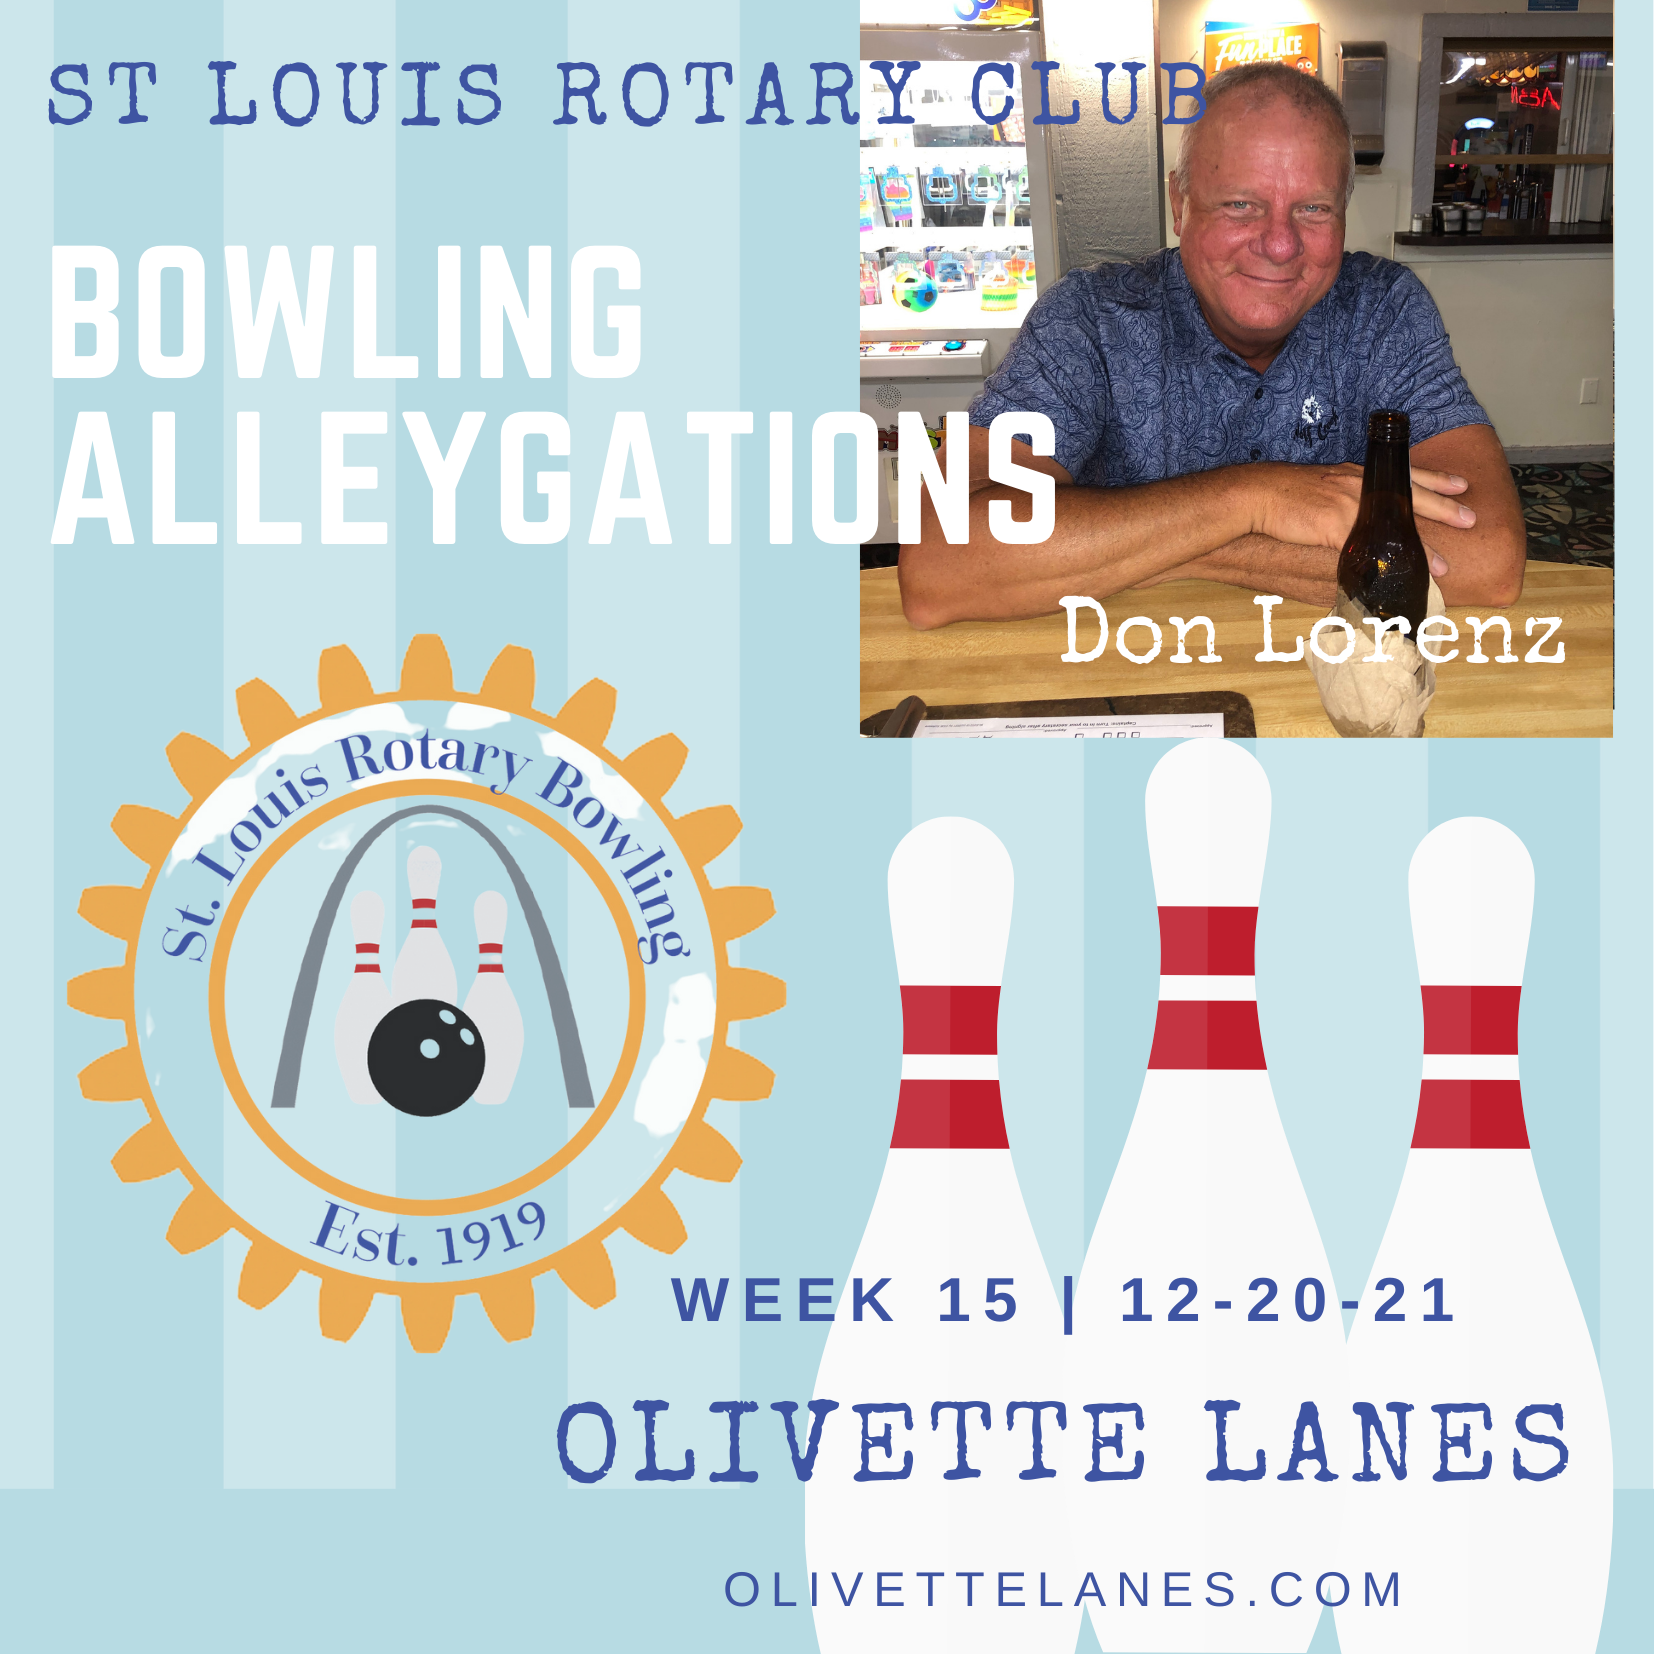 Bowling Alleygations Week 15 _ 12-20-21